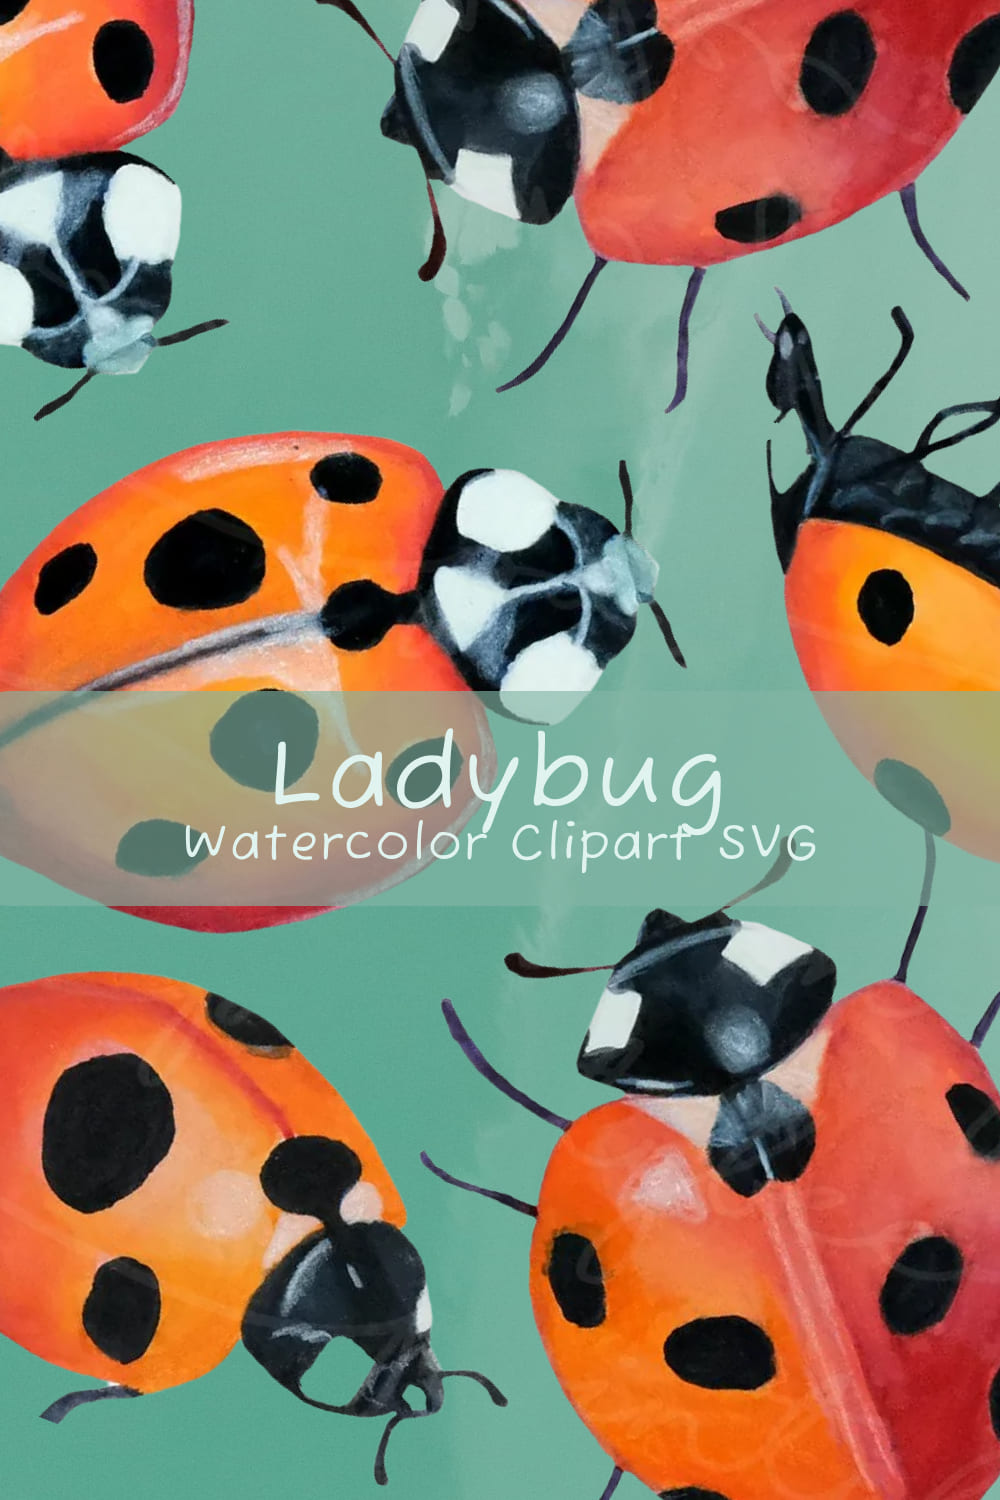 Ladybug watercolor clipart - pinterest image preview.